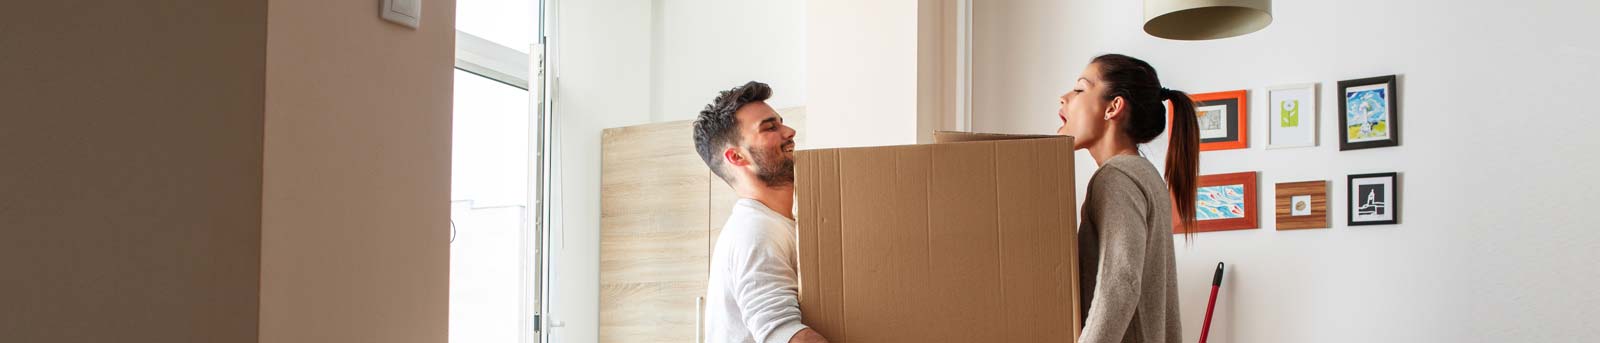 Woman and man listing a moving box in their home